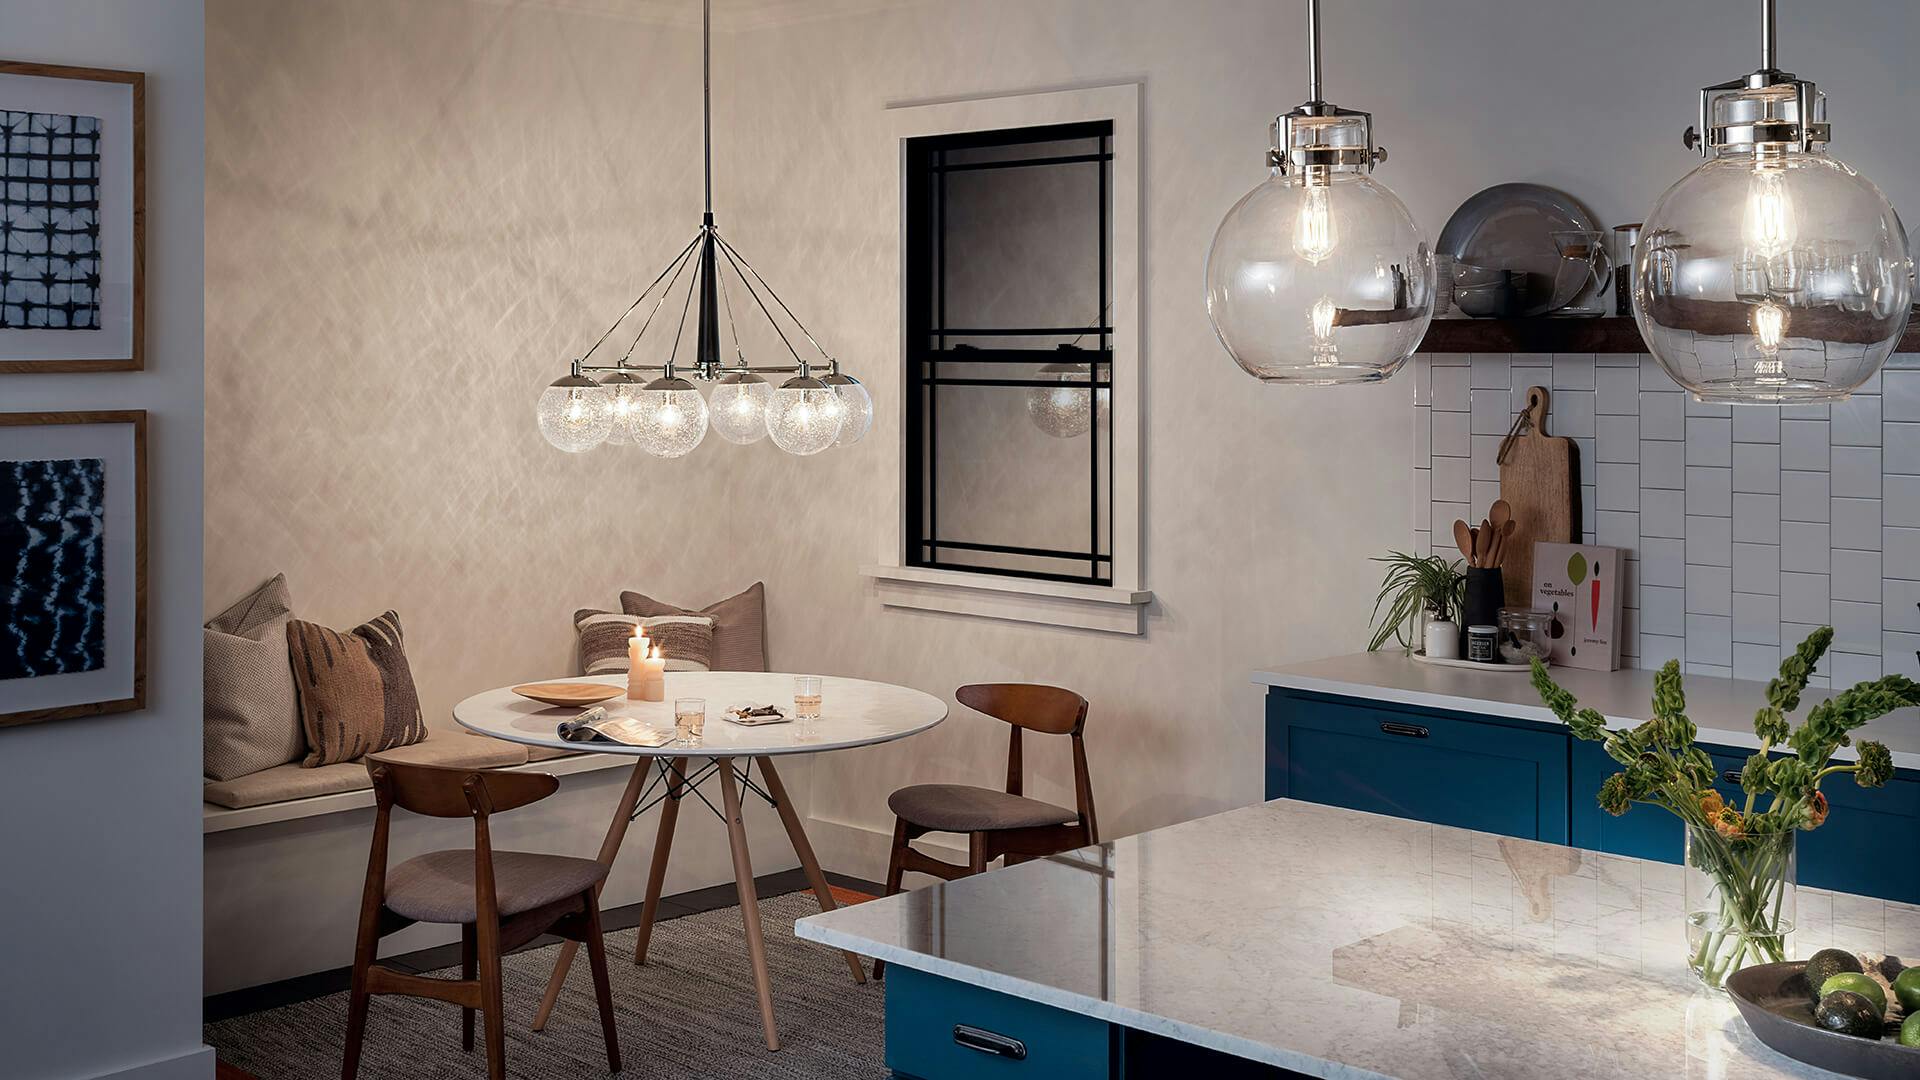 Kitchen in the evening with a nook style dining corner featuring Marilyn Briar chandelier and pendant lights at night